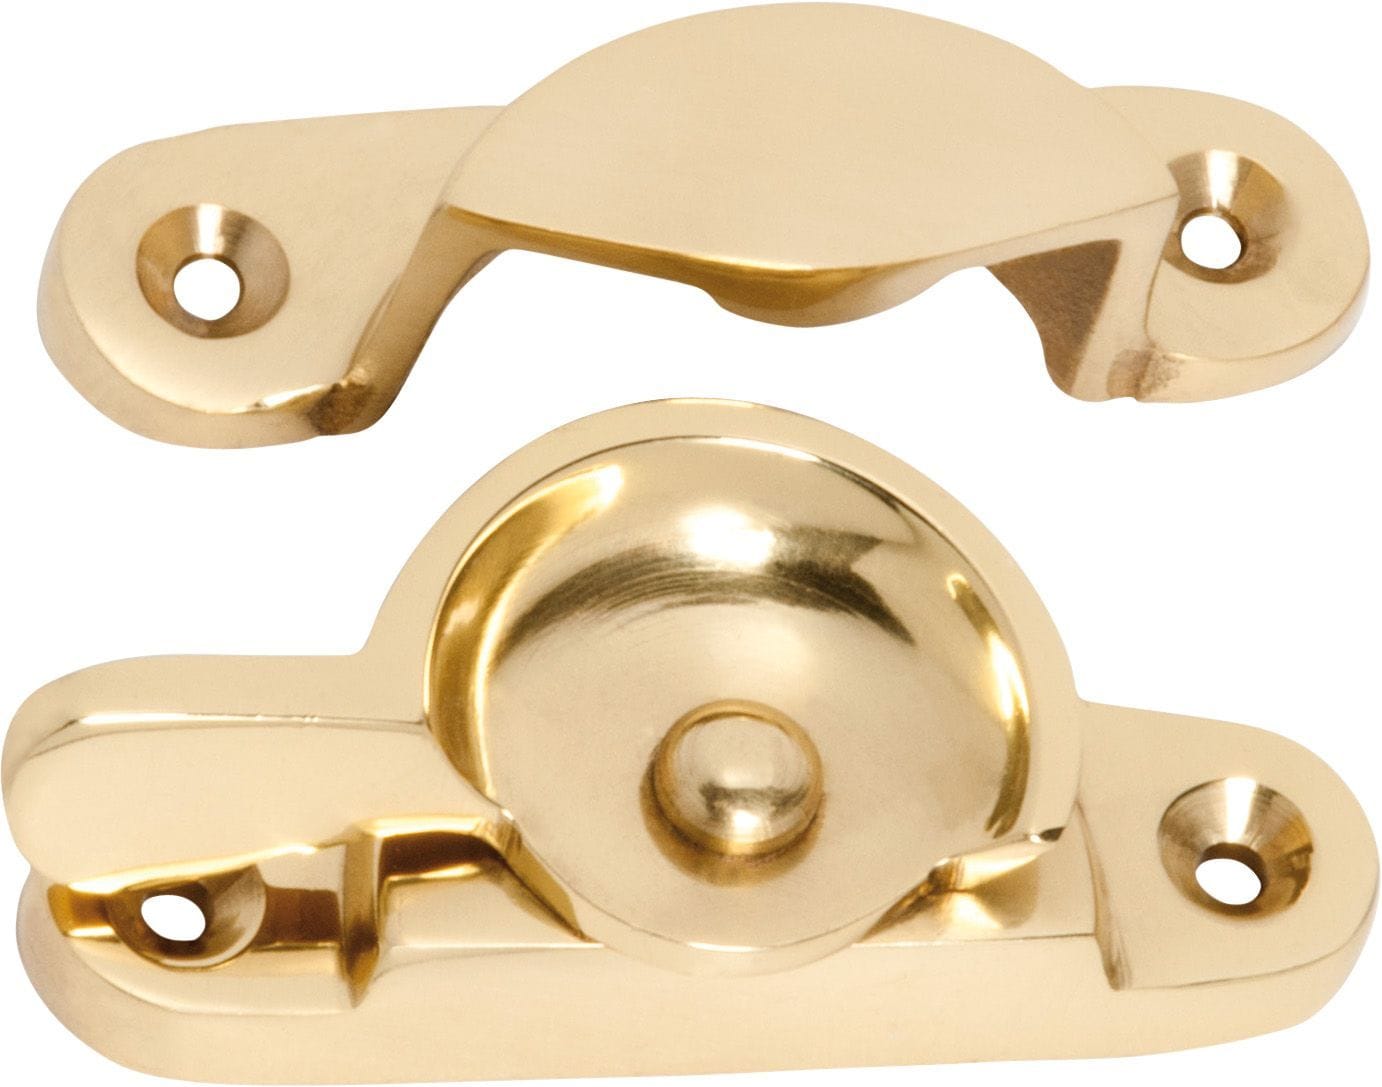 Sash Fastener - Classic Unlacquered Polished Brass